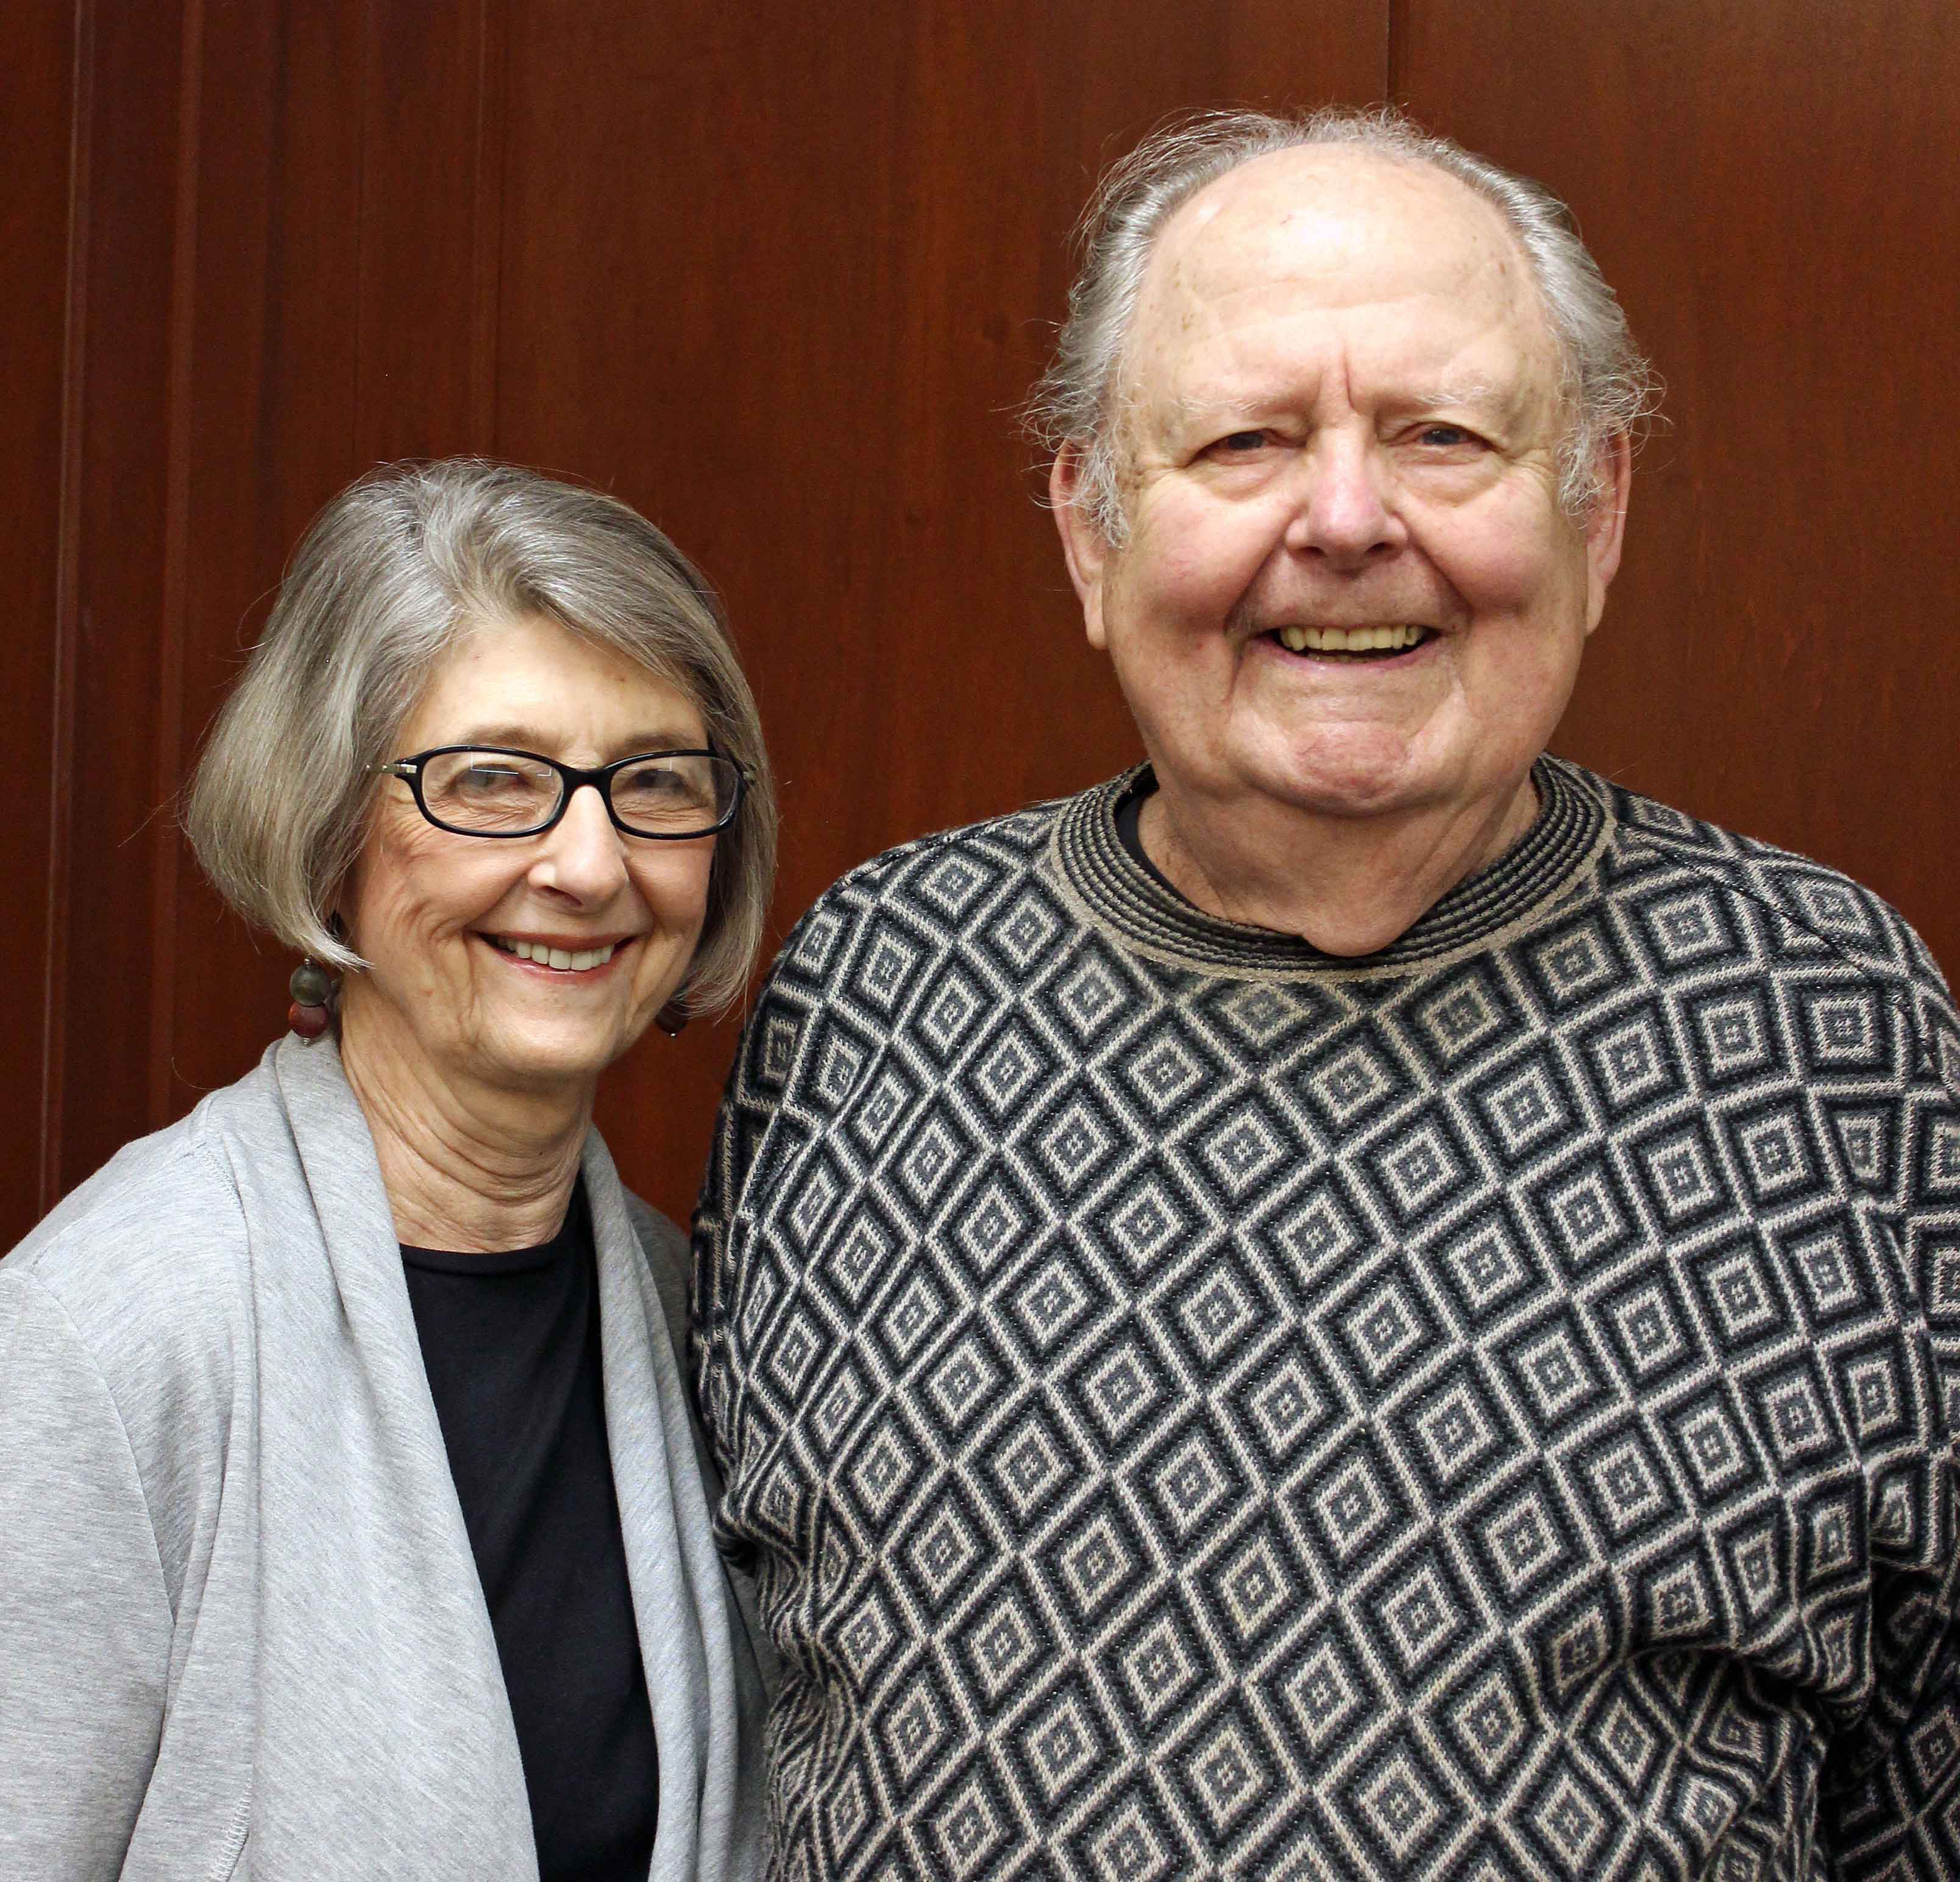 Tom and Mary Jo cropped for website